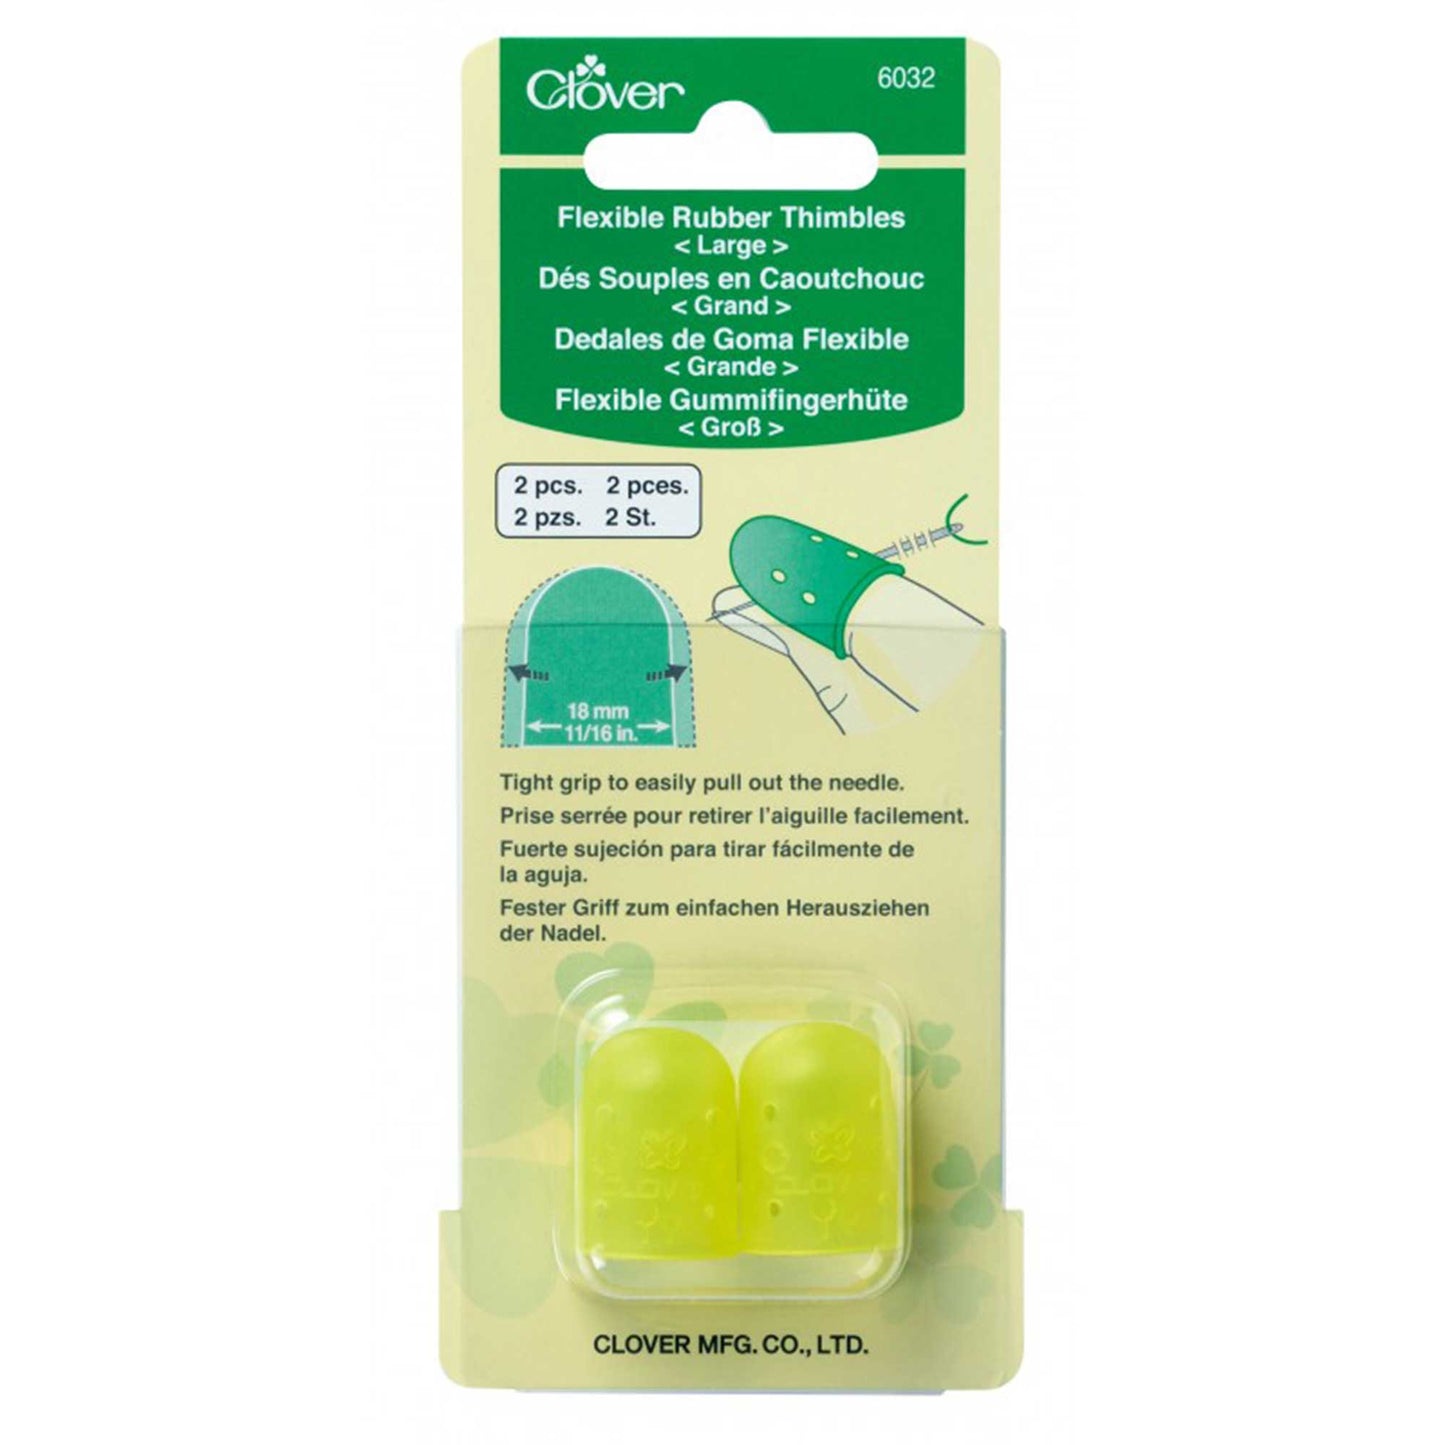 Clover Thimbles flexible rubber pack of 2 large